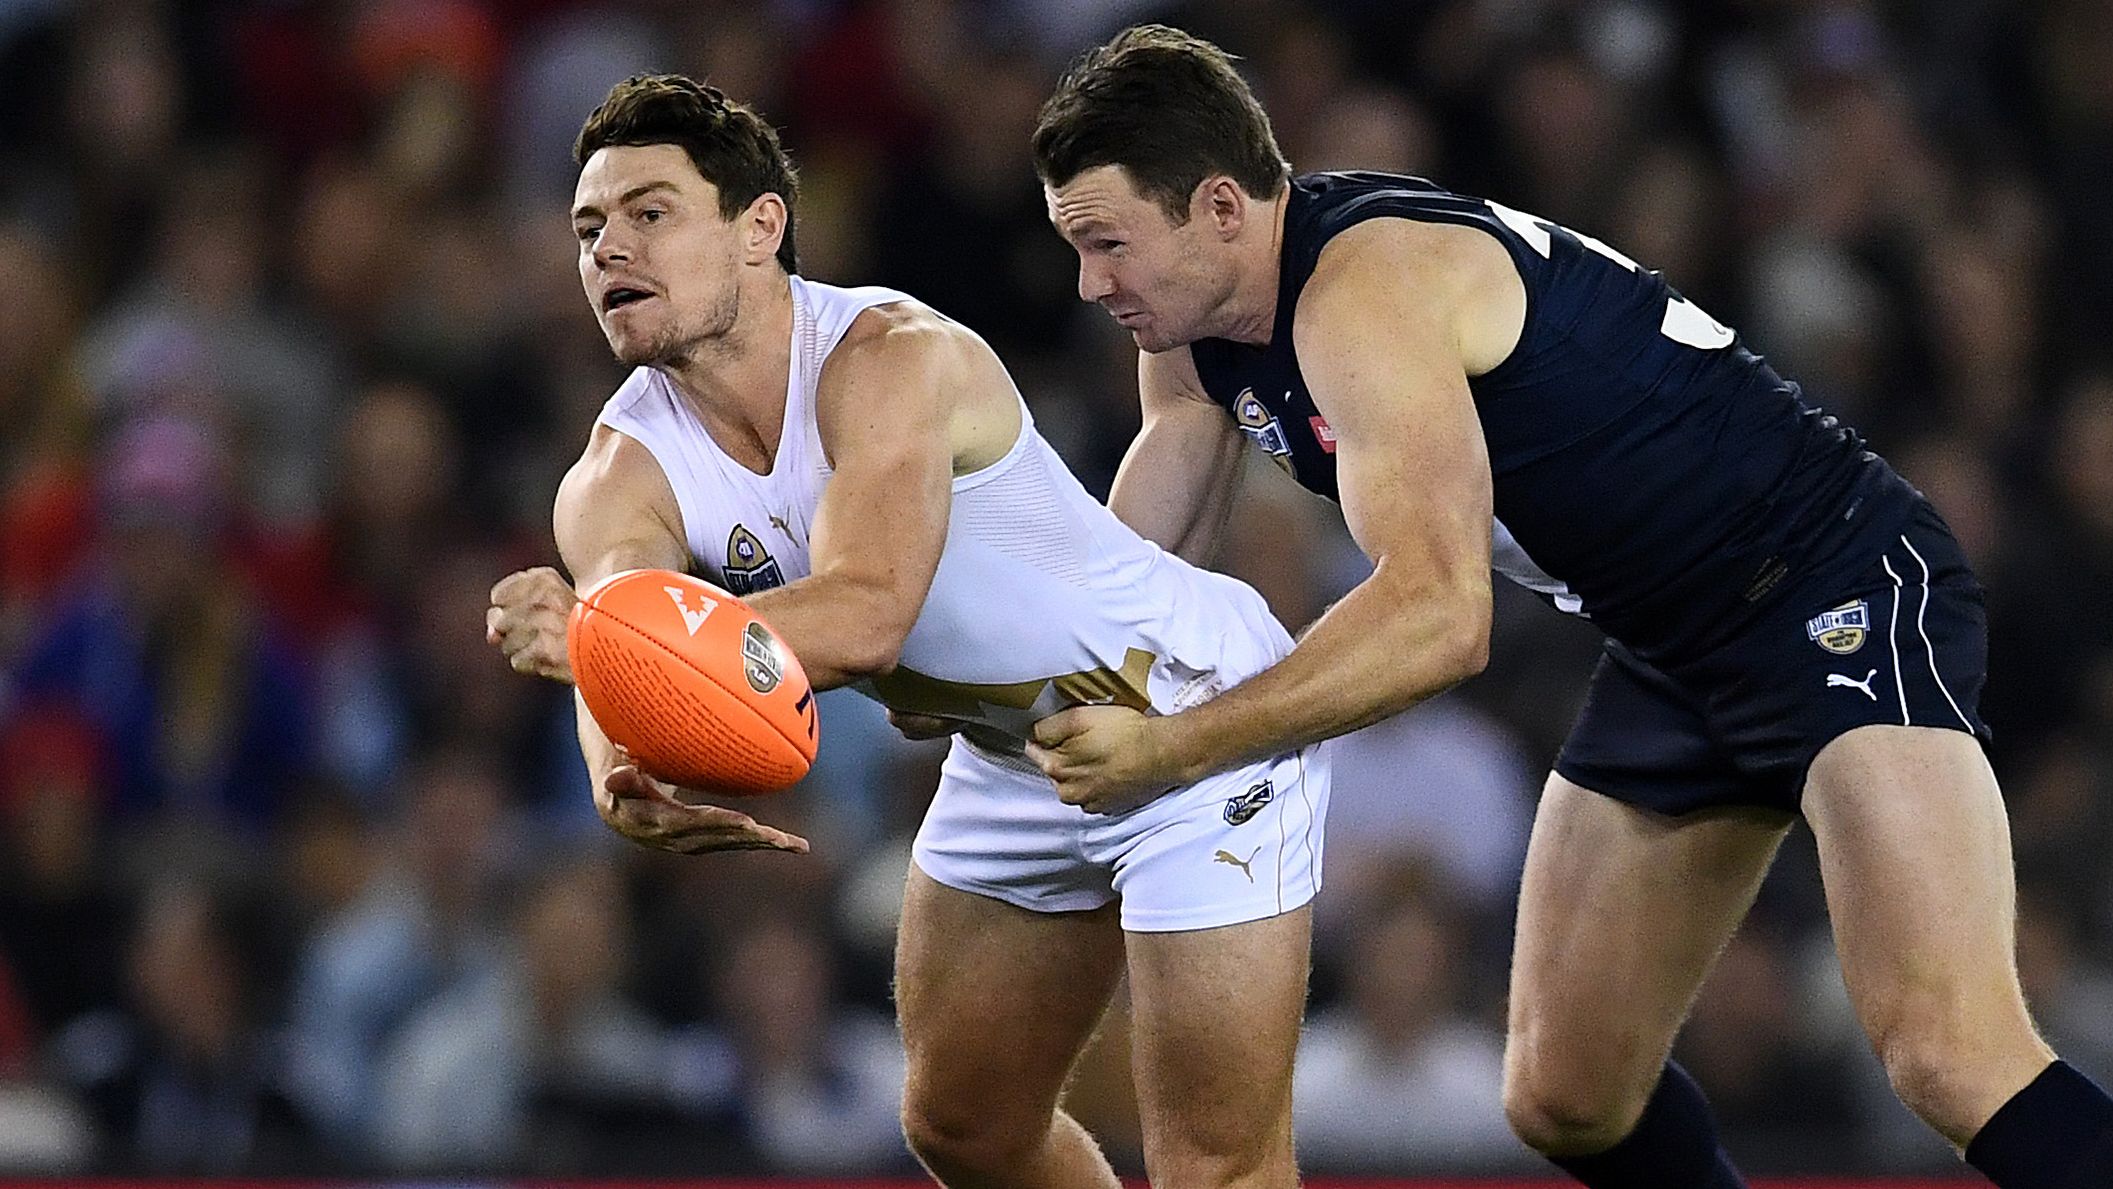 Lachie Neale of the All Stars is tackled by Patrick Dangerfield of Victoria during the 2020 AFL State of Origin.